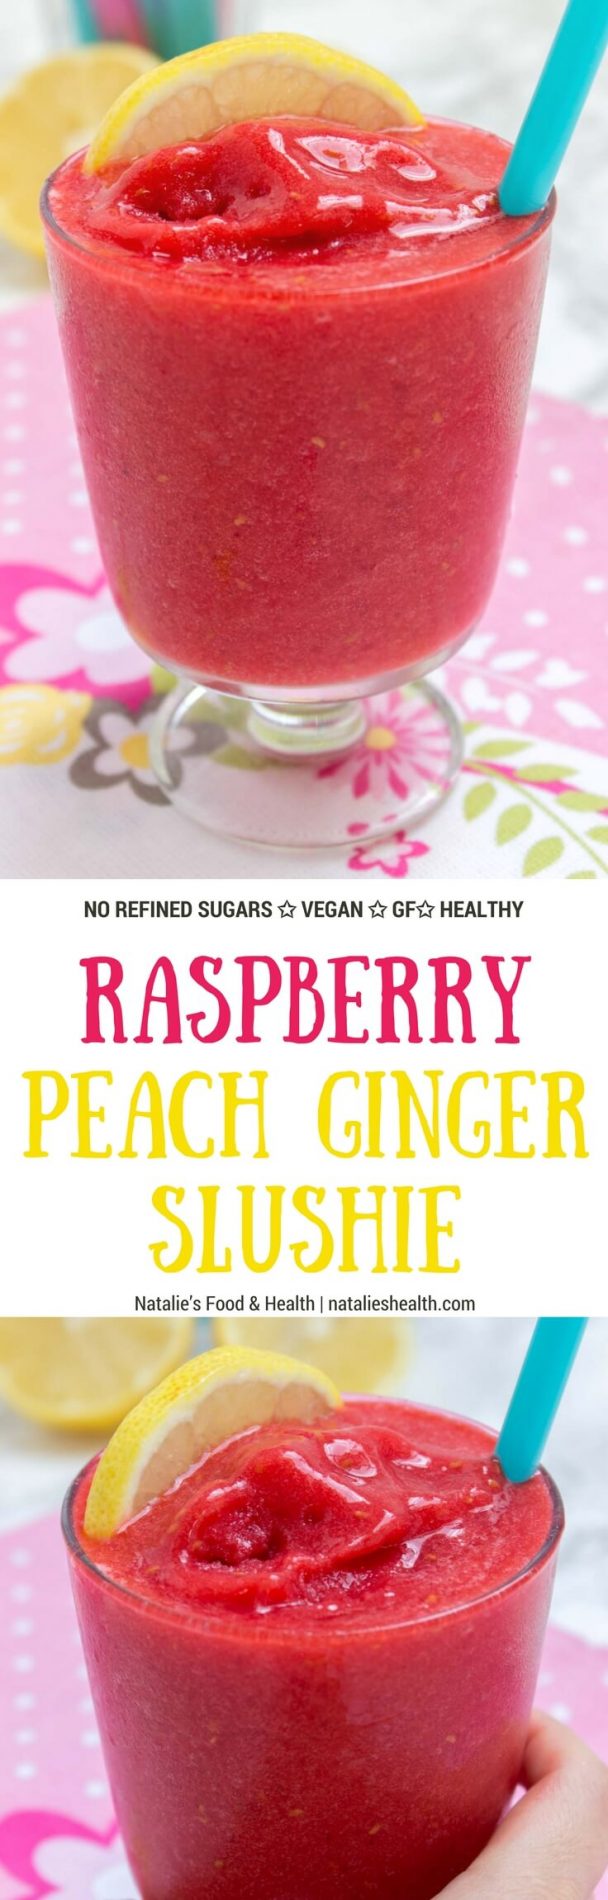 Flavorful and dazzling, Raspberry Peach Ginger Slushie is easy summer refreshment that will power you up with vitamins. Smashed summer fruits with the addition of aromatic ginger is something that will delight you and the kids. This slushie is sweet but made refined sugar-free and super HEALTHY. A must try this summer. #summer #drinks #kidsfriendly #family #vegan #sugarfree #glutenfree #fit #fruits #skinny | natalieshealth.com